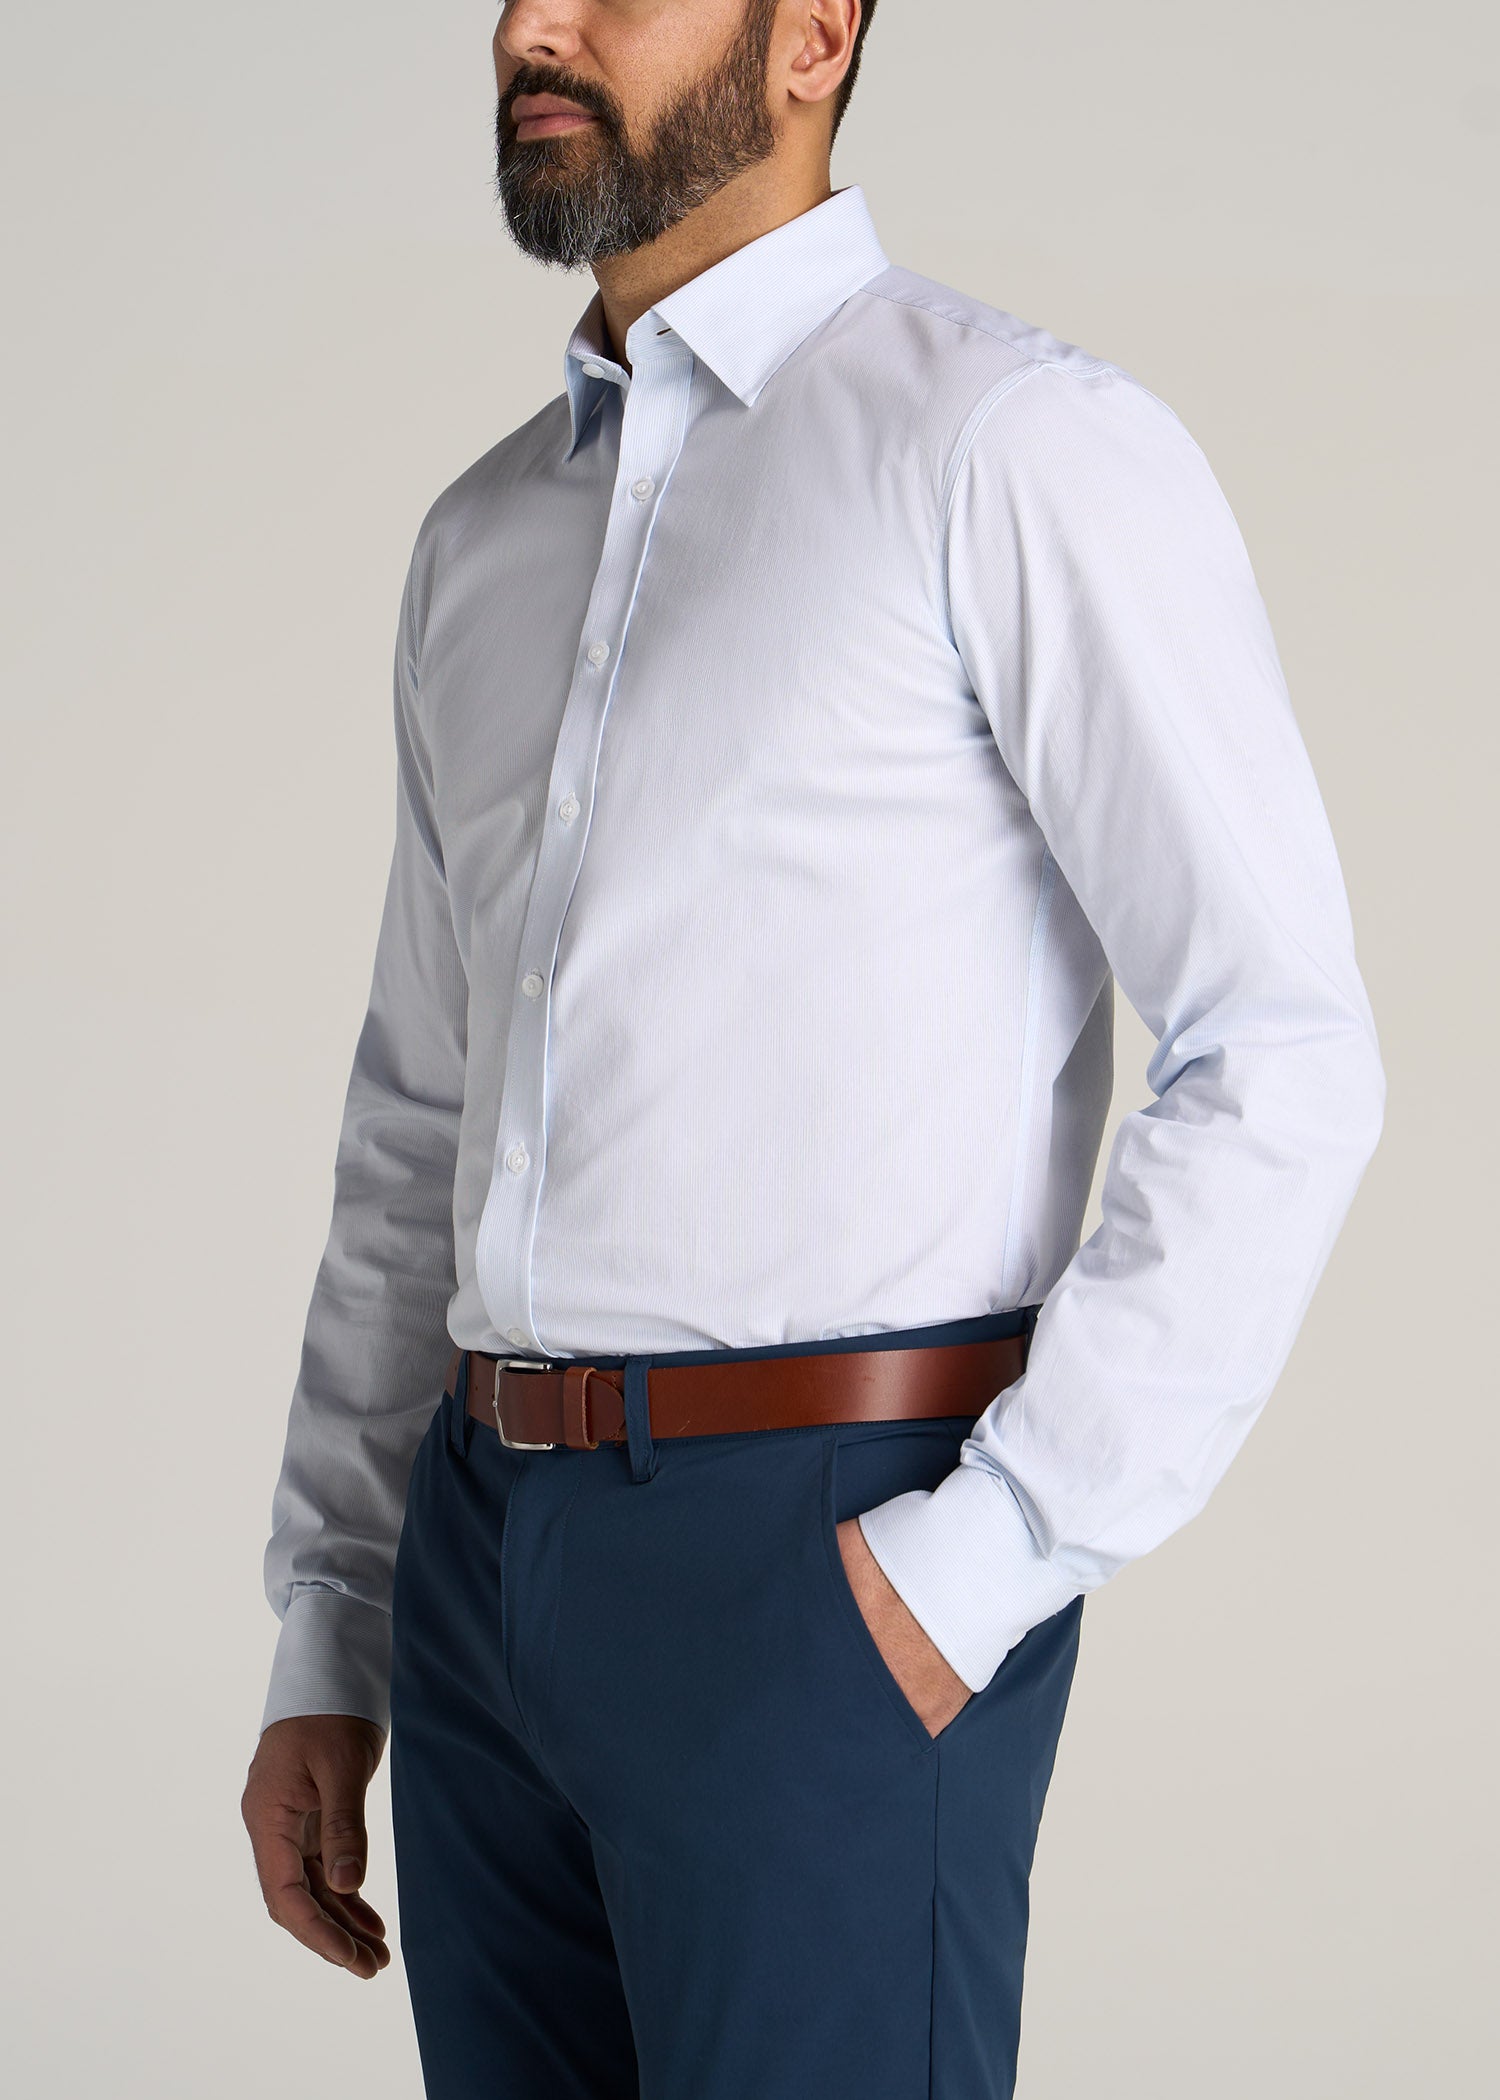 How To Wear Blue Pants And Brown Shoes Suits Expert, 40% OFF